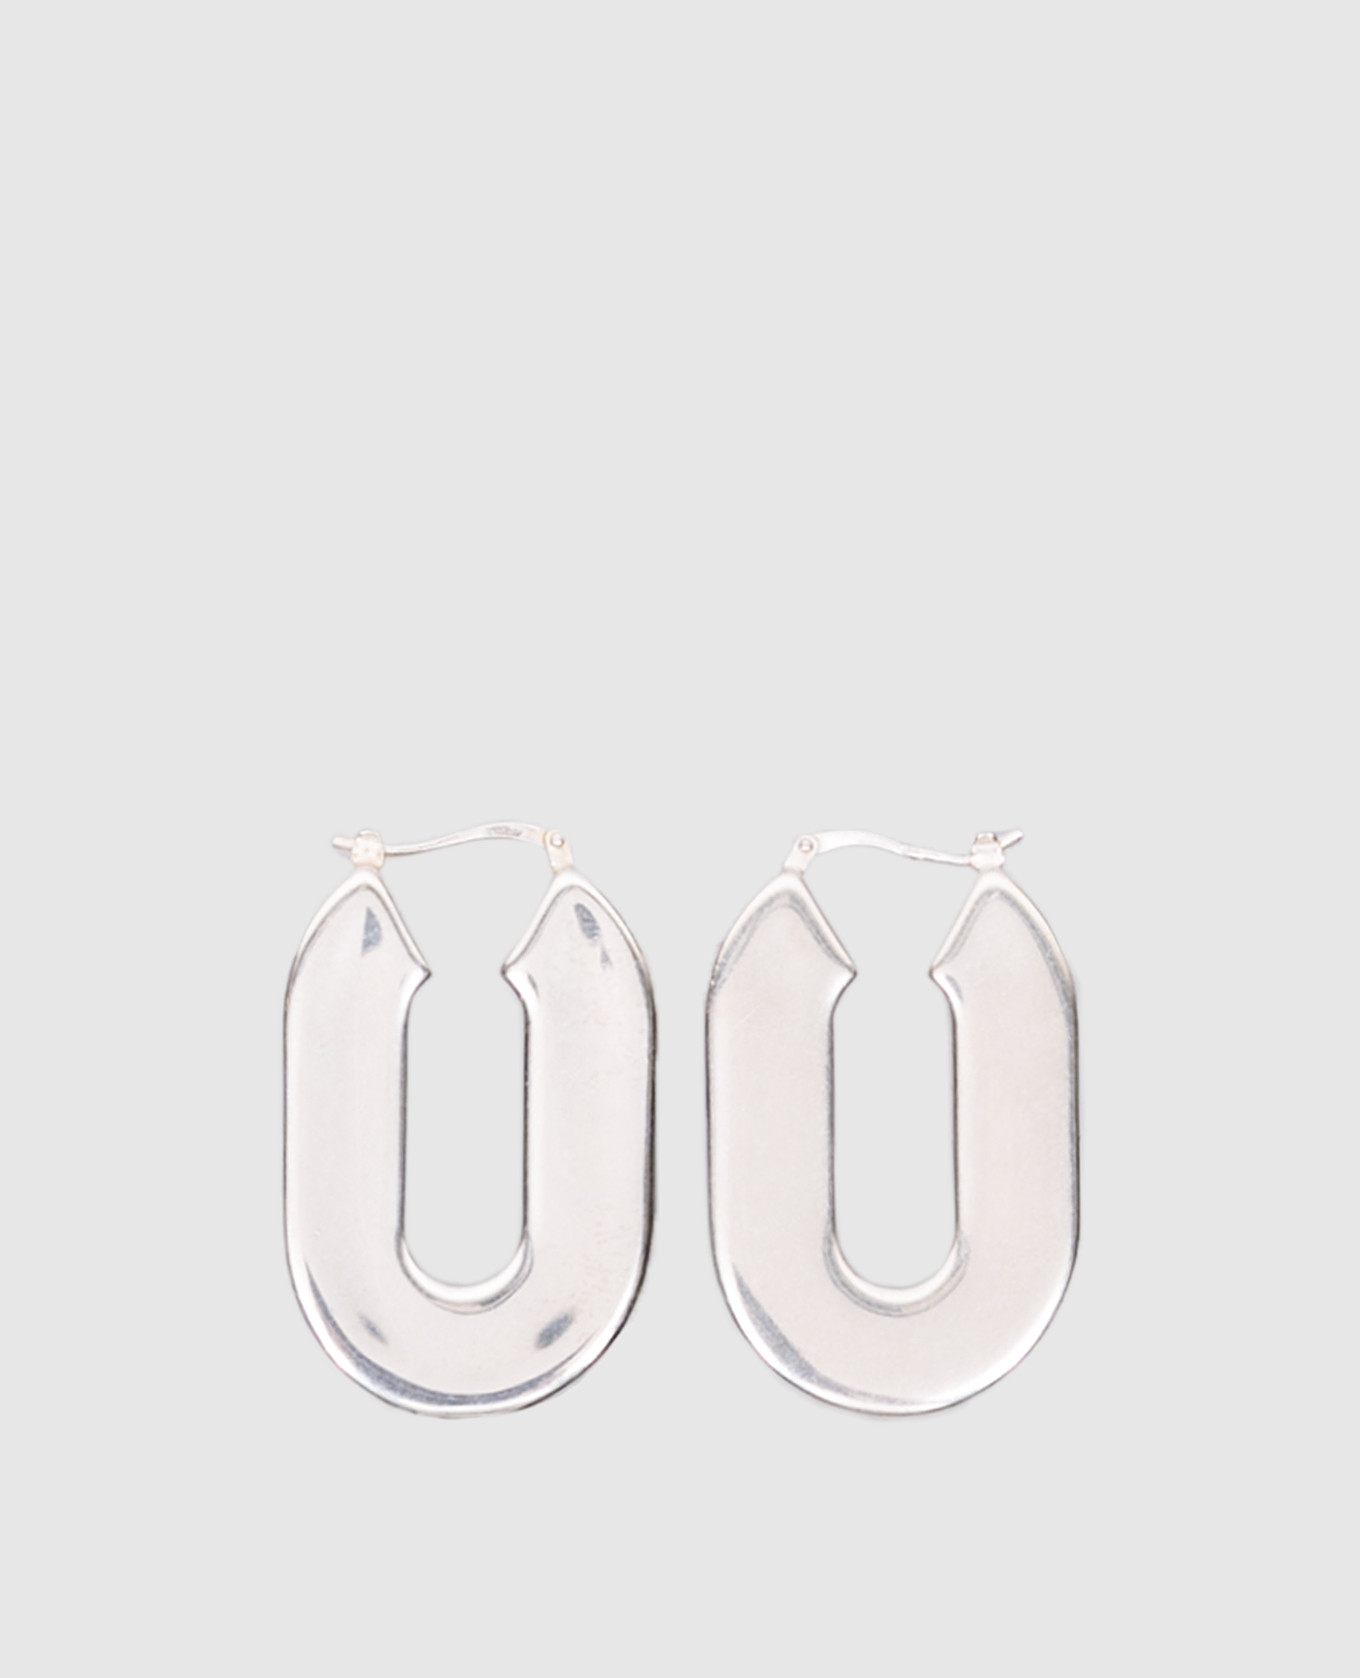 Silver earrings with logo engraving